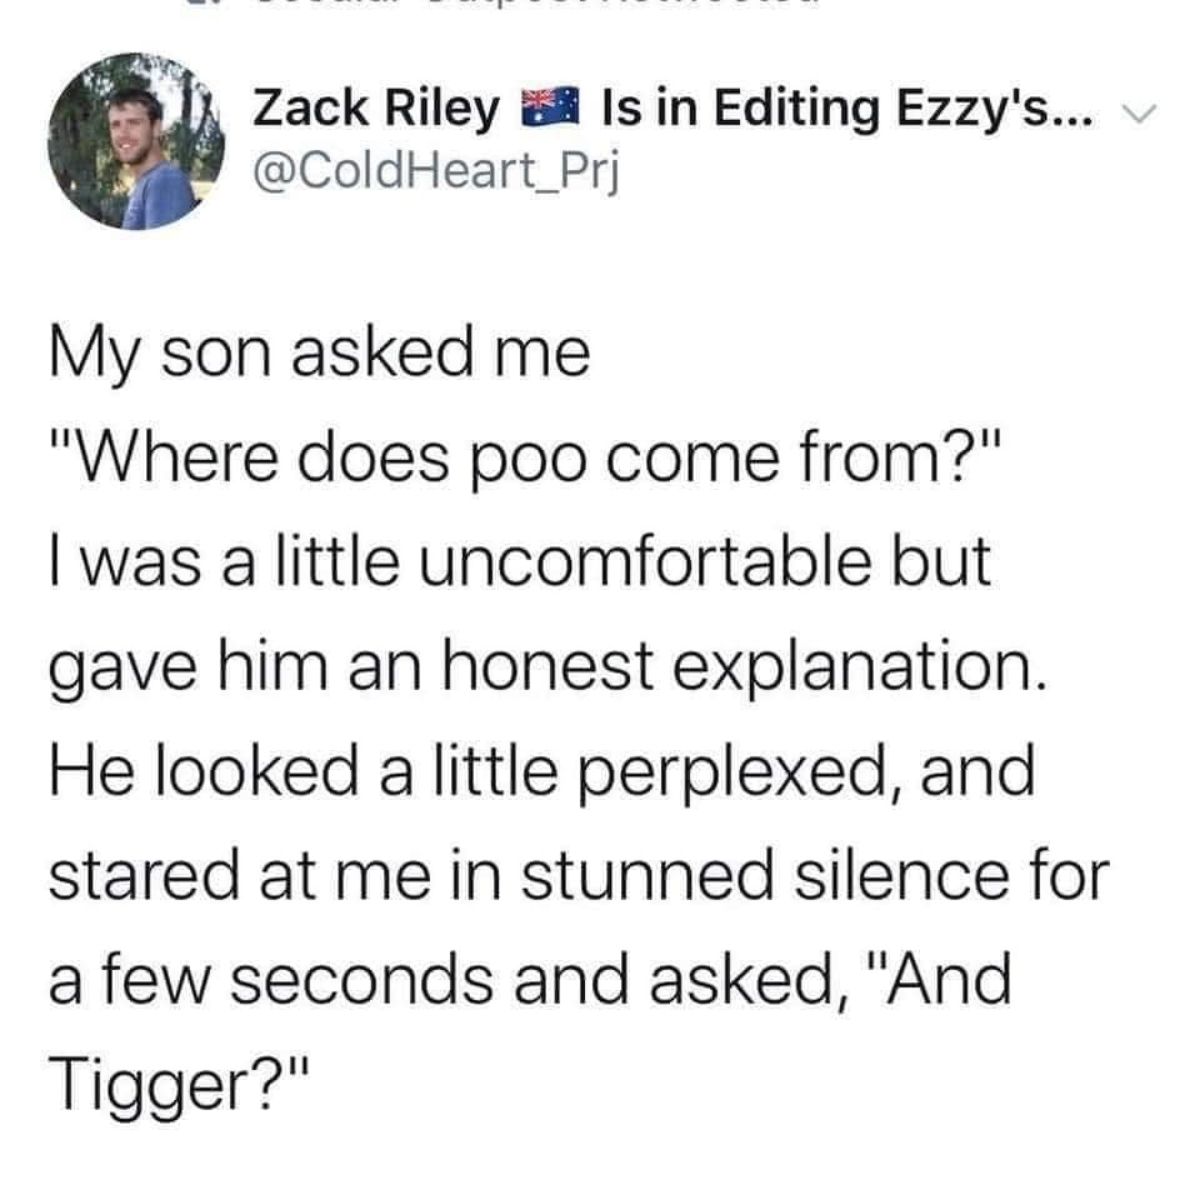 screenshot - Zack Riley Is in Editing Ezzy's... v My son asked me "Where does poo come from?" I was a little uncomfortable but gave him an honest explanation. He looked a little perplexed, and stared at me in stunned silence for a few seconds and asked, "